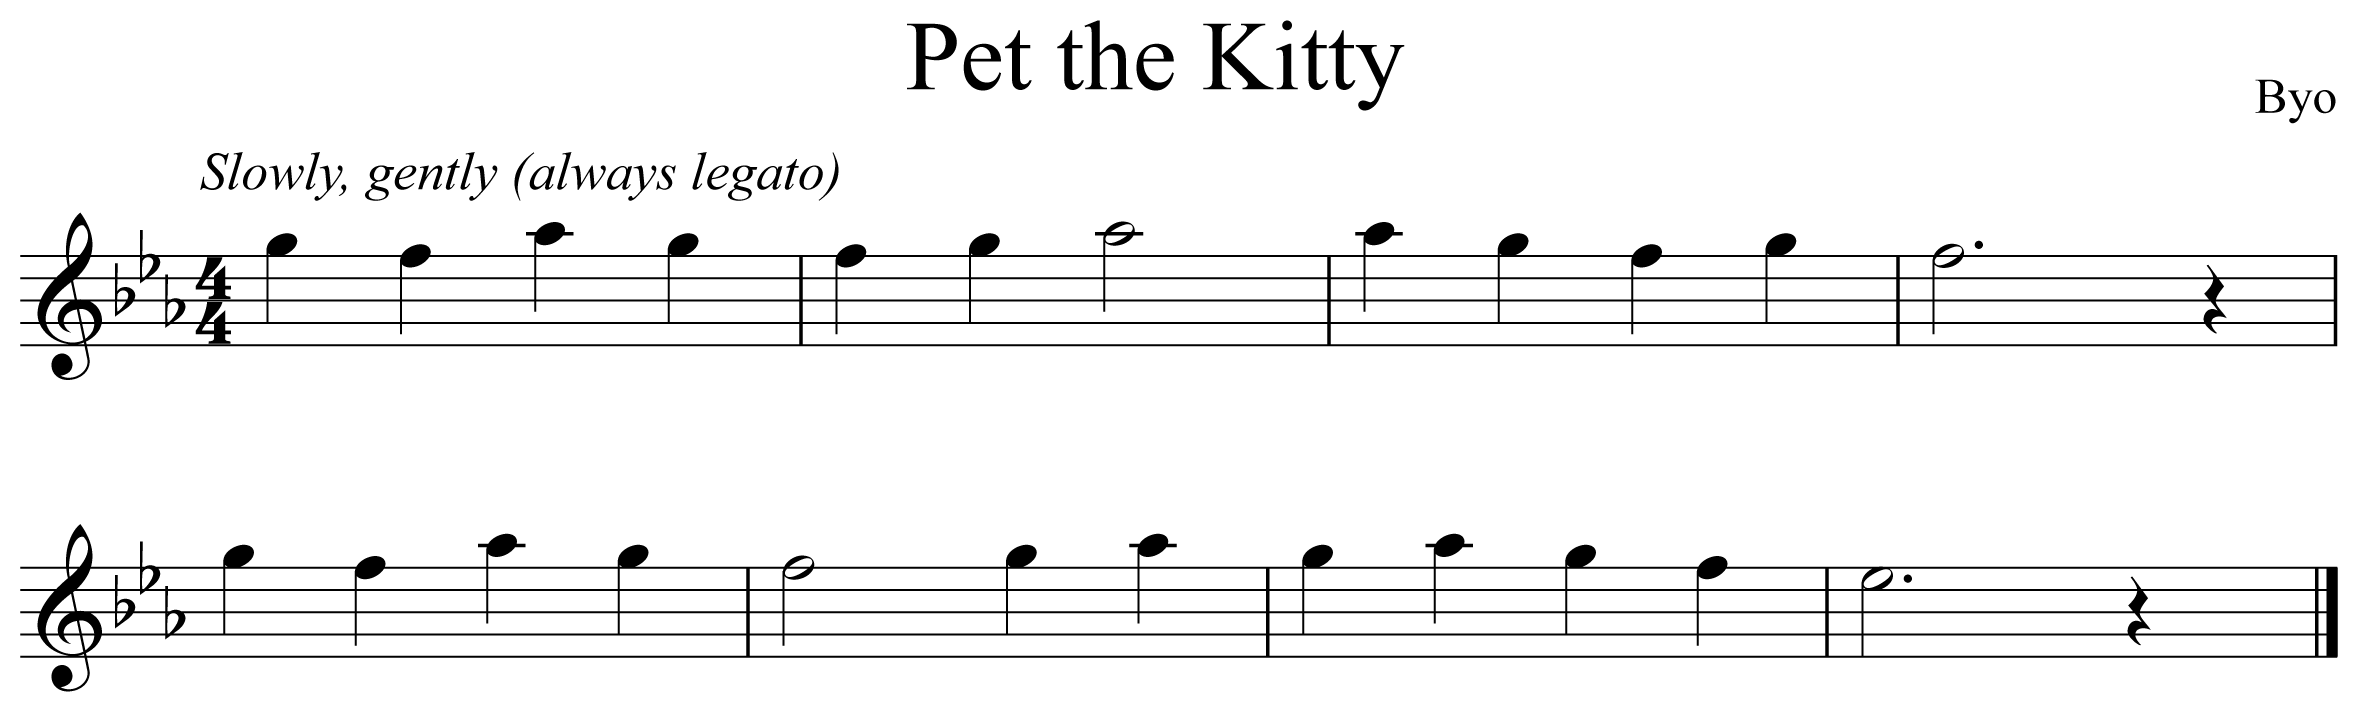 Pet the Kitty Music Notation Flute